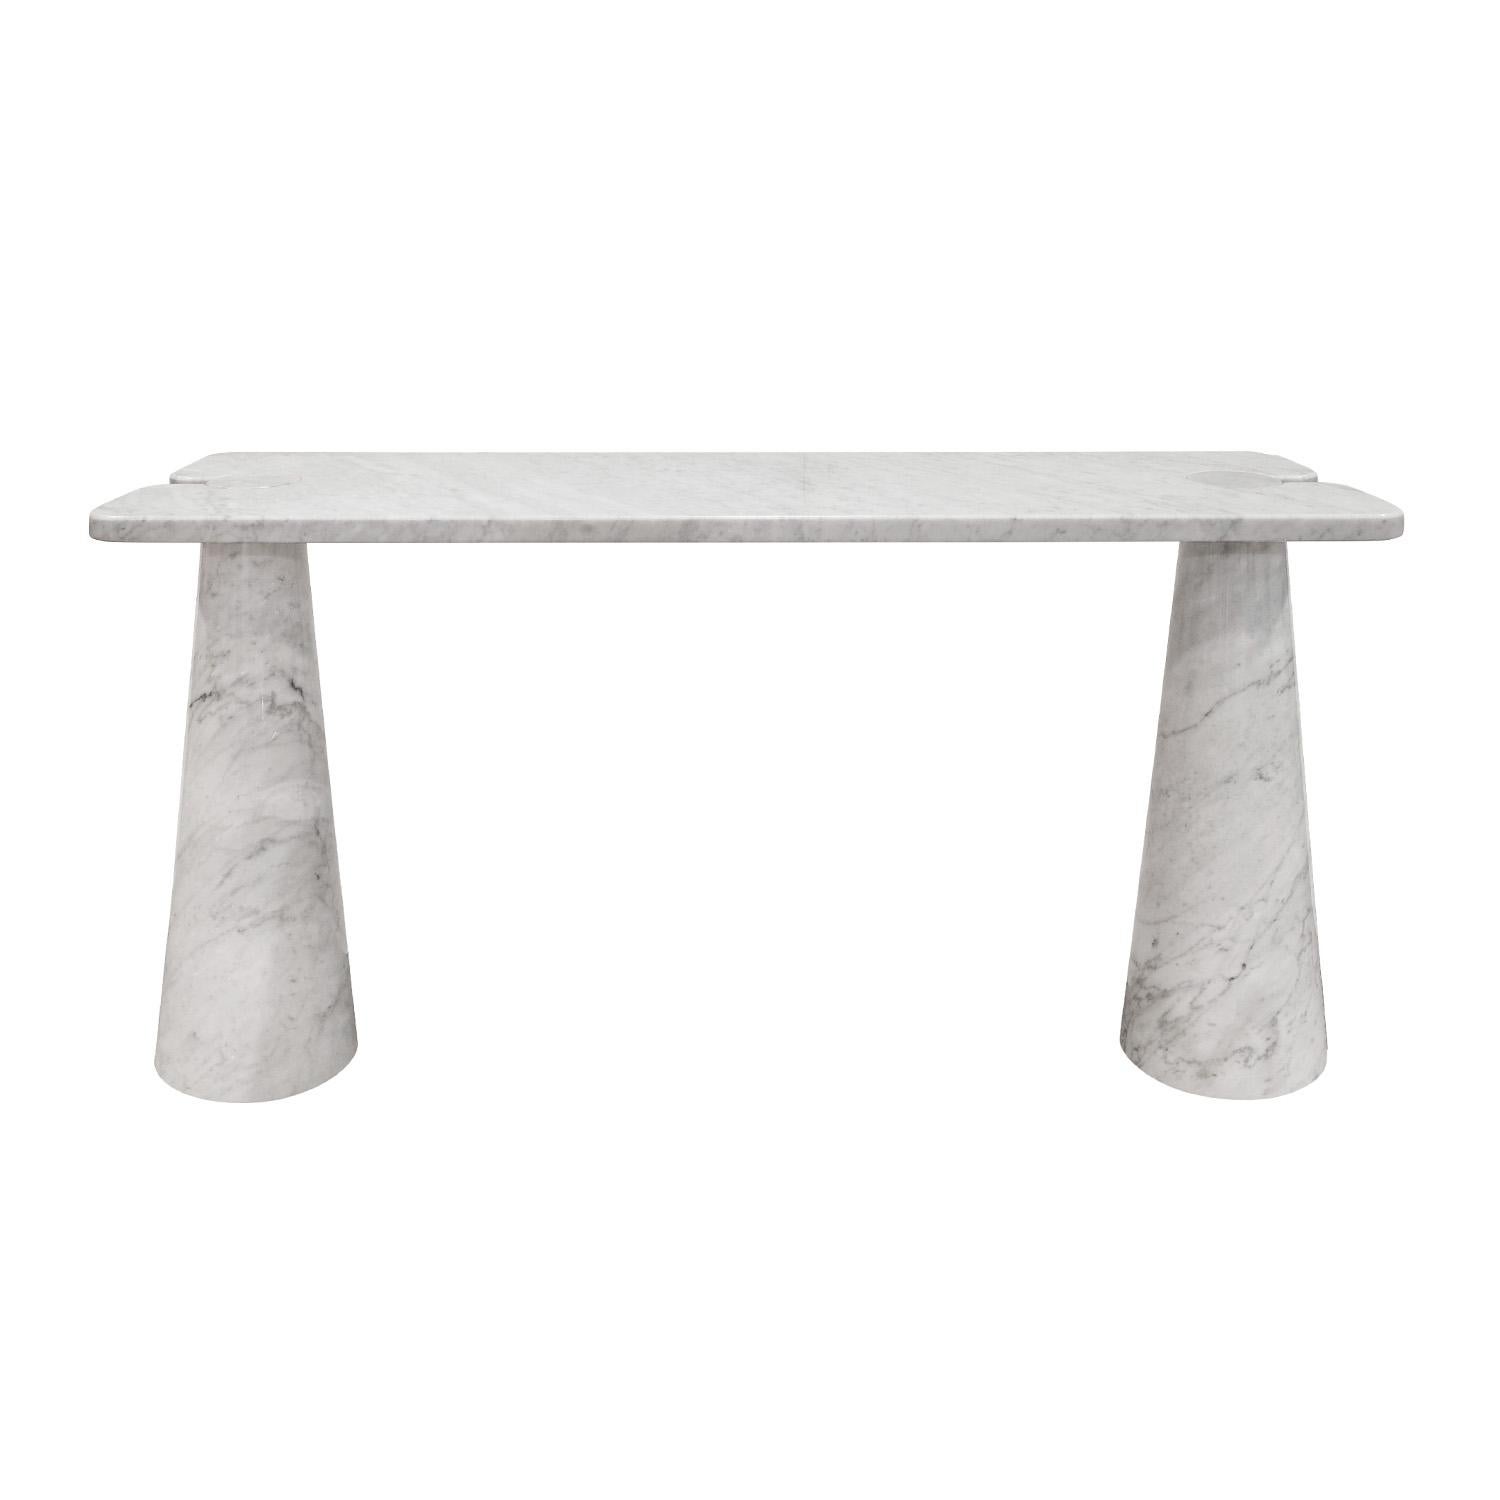 Beautifully crafted console table model E20 in polished white Carrera marble by Angelo Mangiarotti, Eros Collection, for Skipper, Italy 1970's.  This series by Mangiarotti is exceptional in every way.  This console is a show stopper.